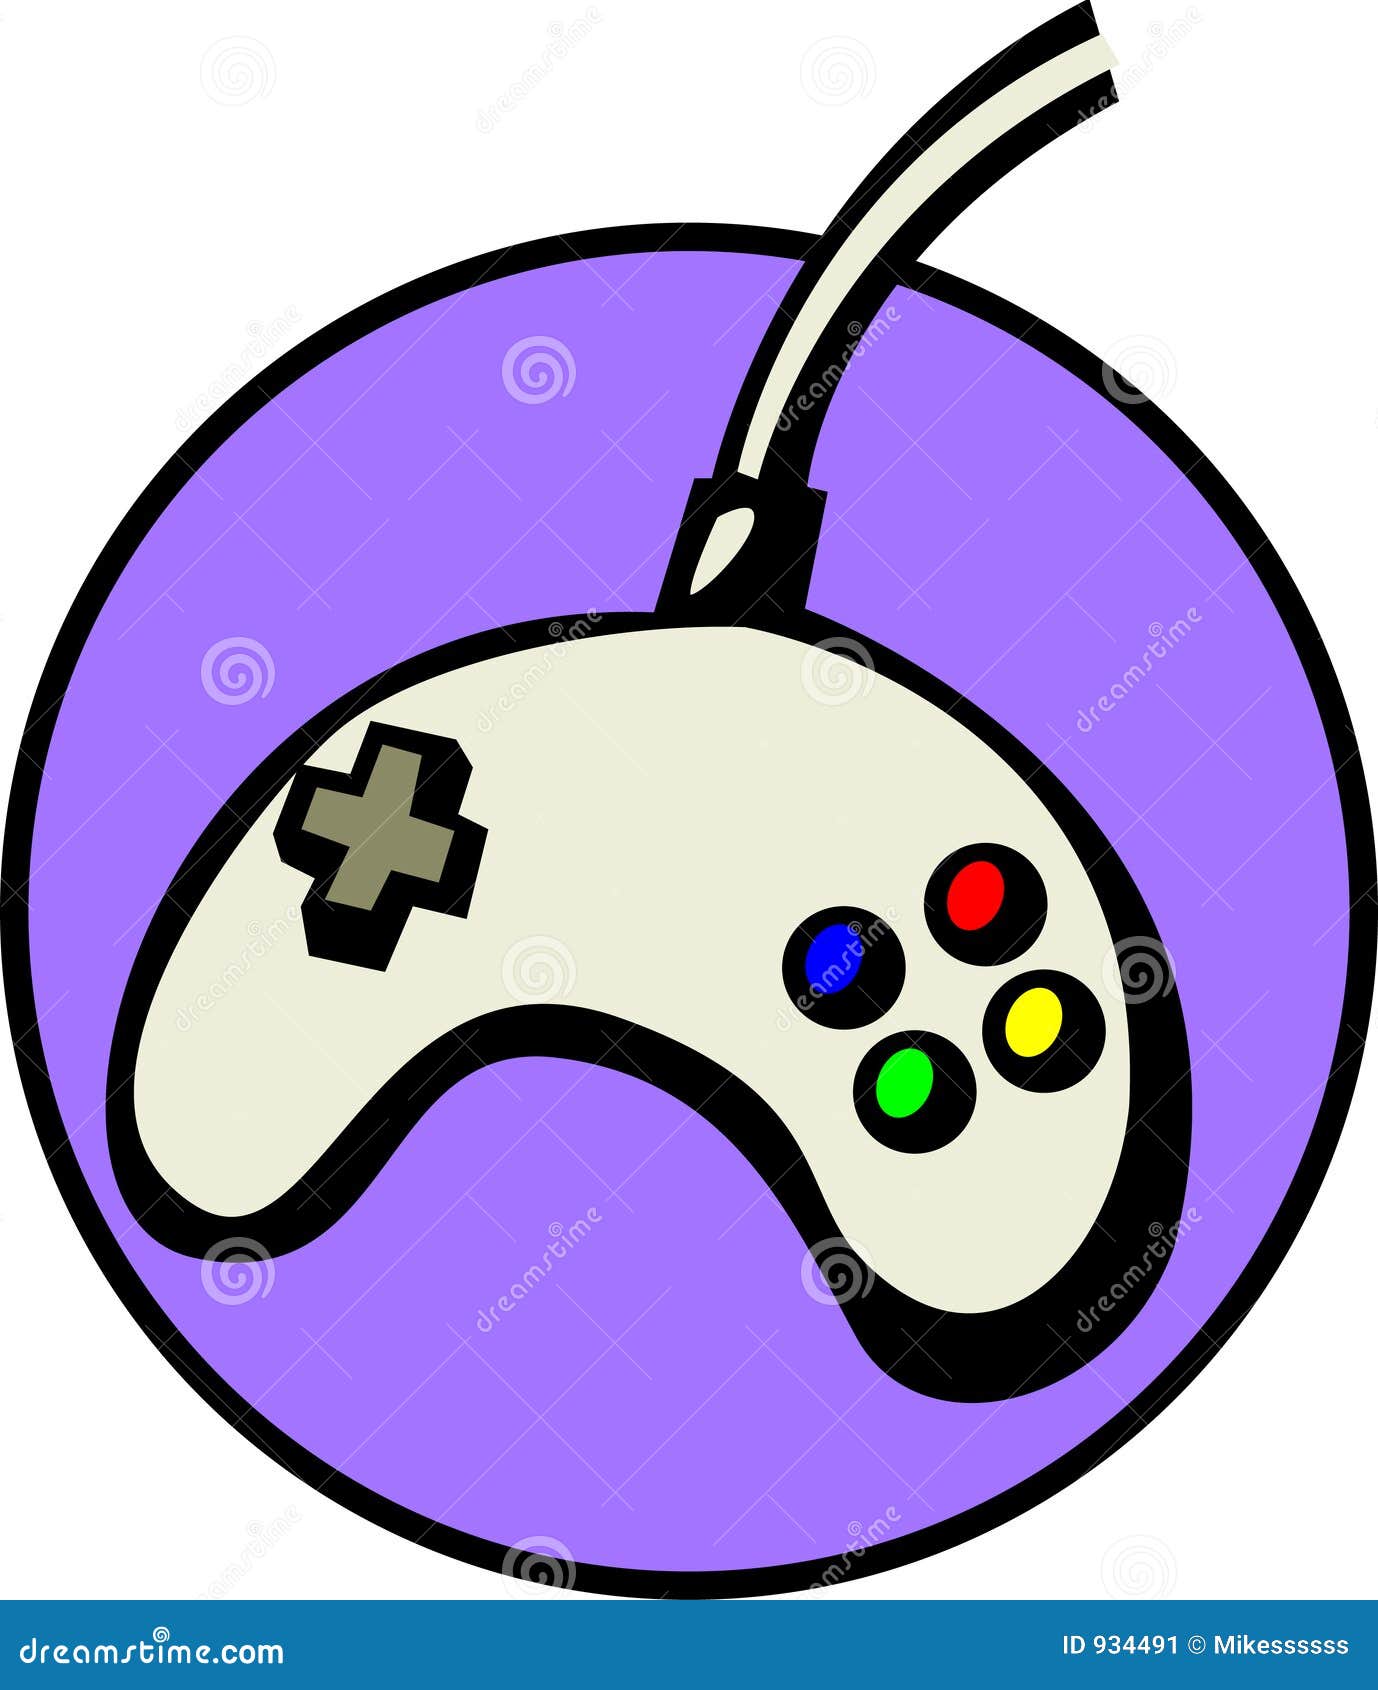 game time clipart - photo #32